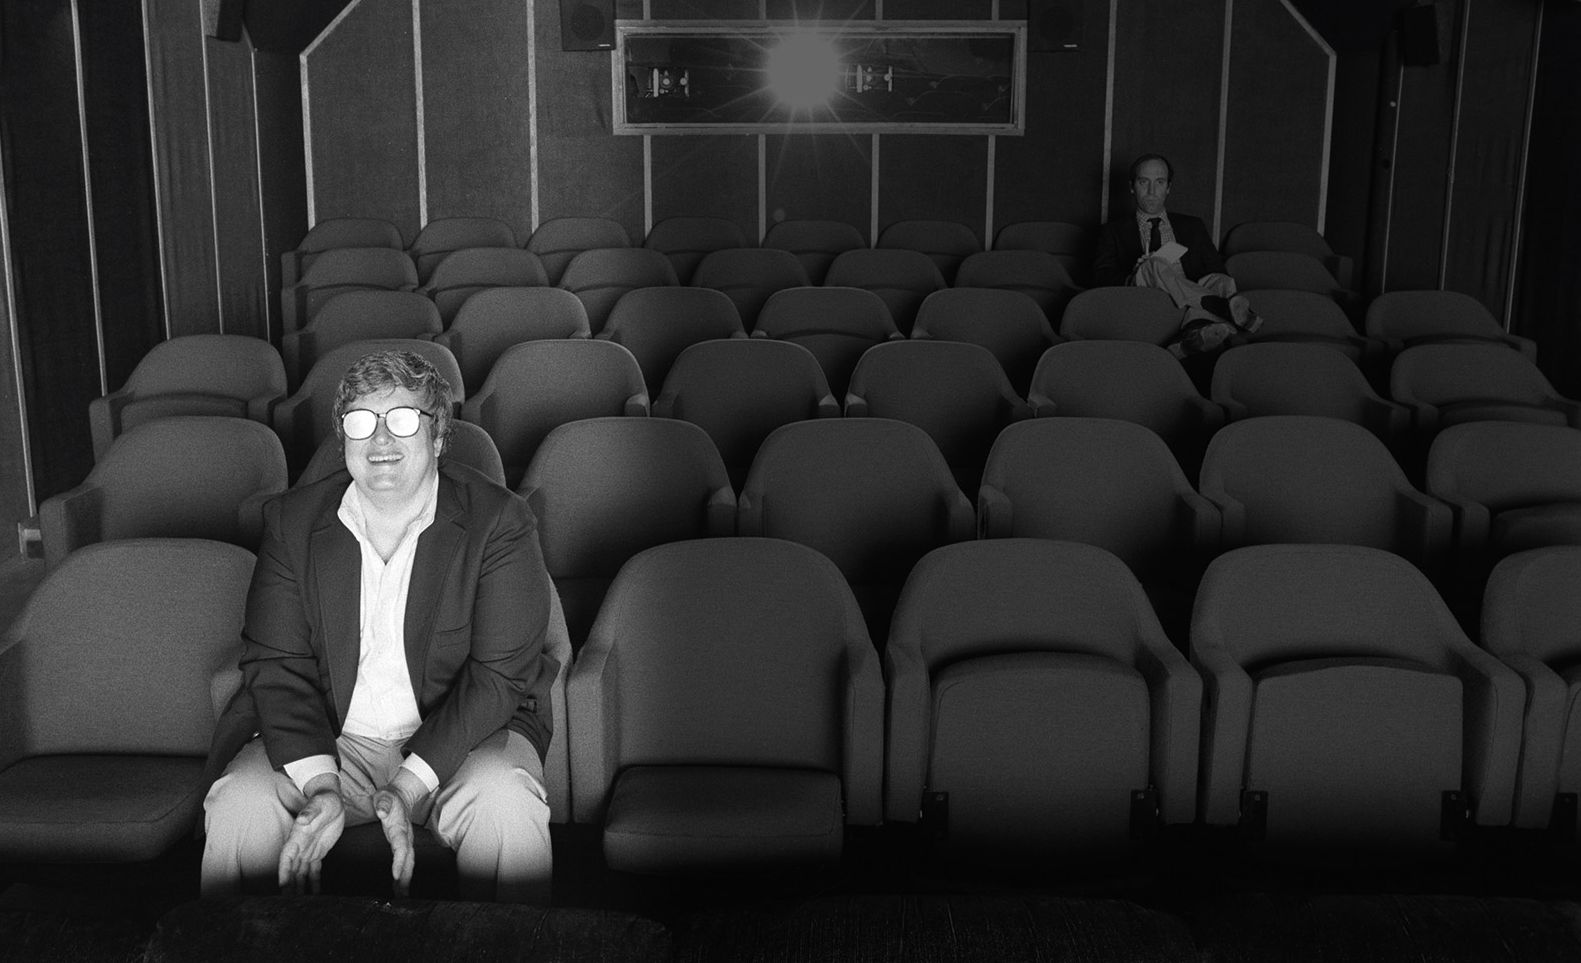 Roger Ebert in the theater watching a movie